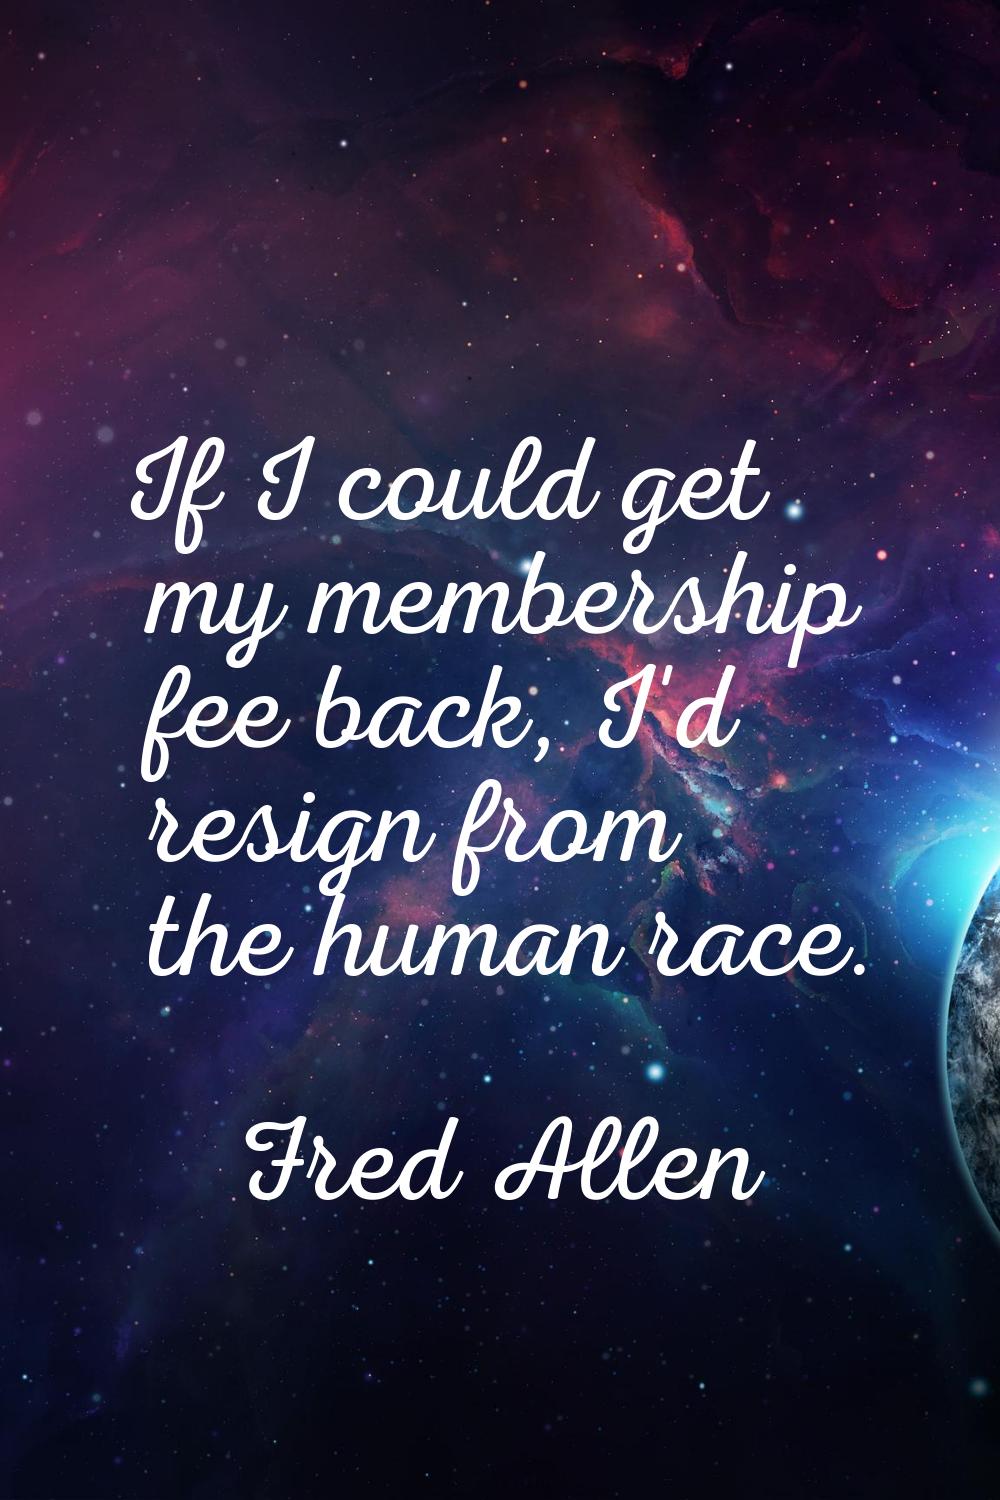 If I could get my membership fee back, I'd resign from the human race.